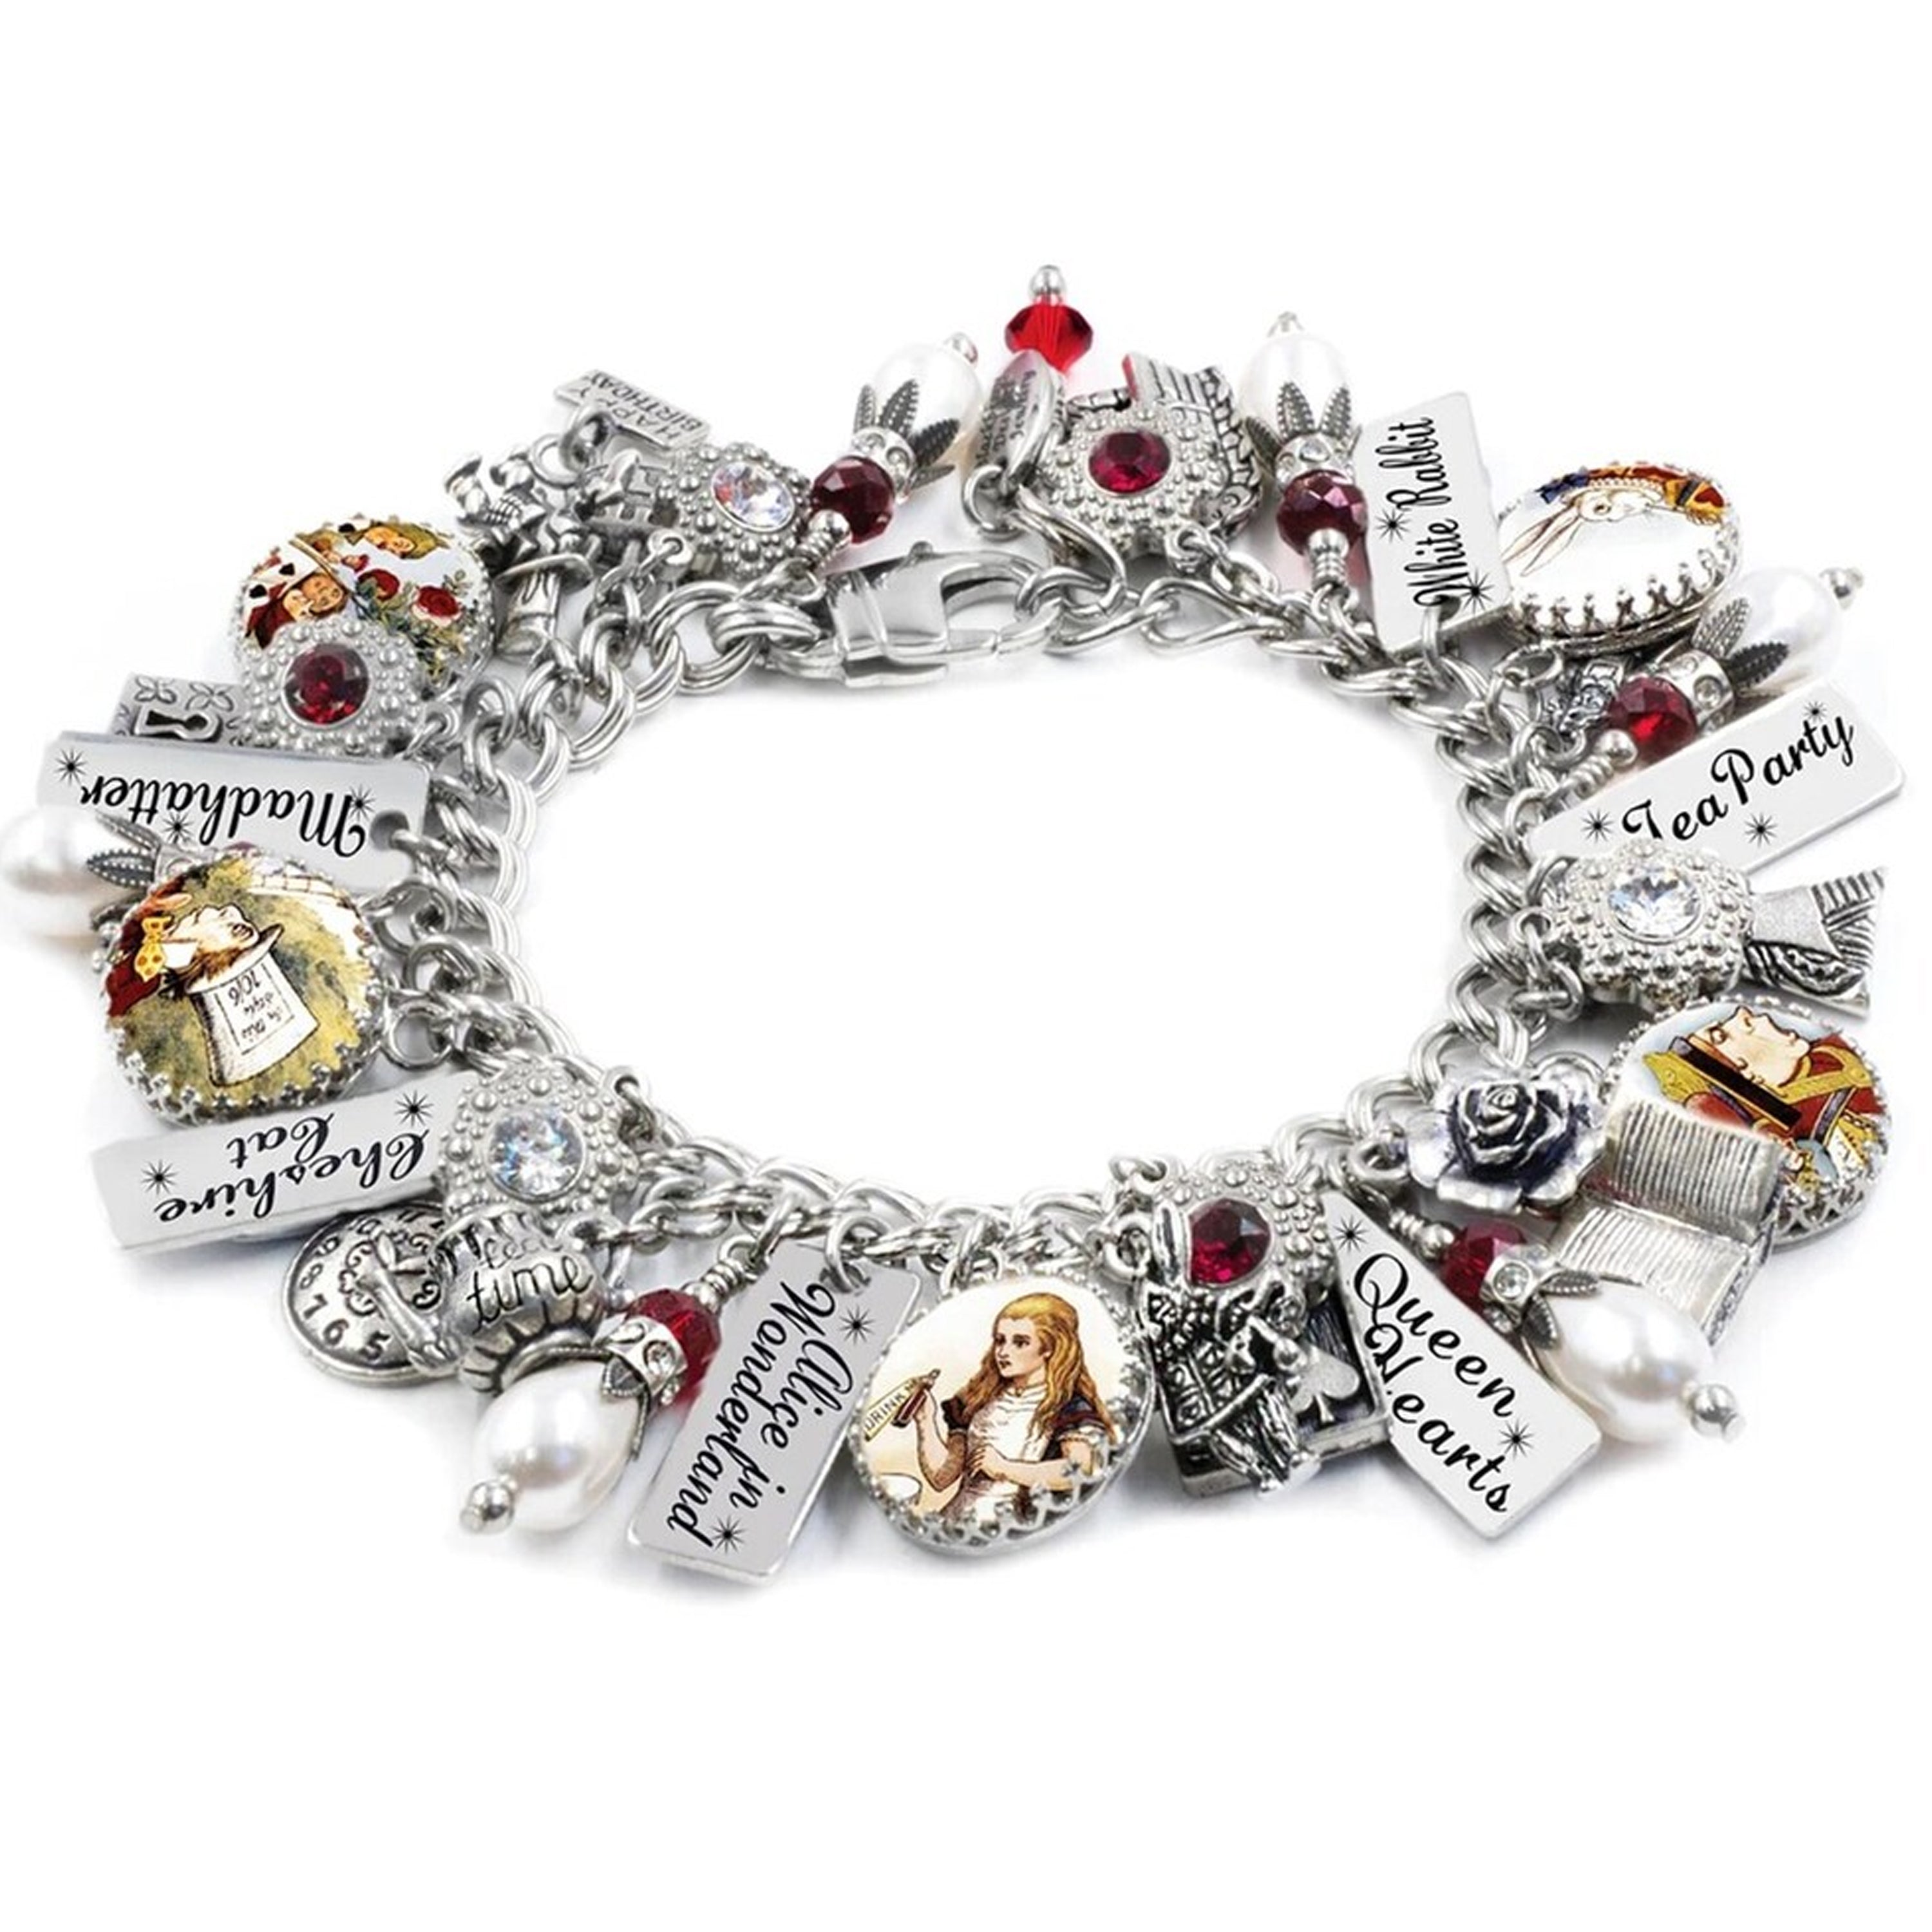 AUTHENTIC Pandora bracelet with retired Alice in Wonderland charms